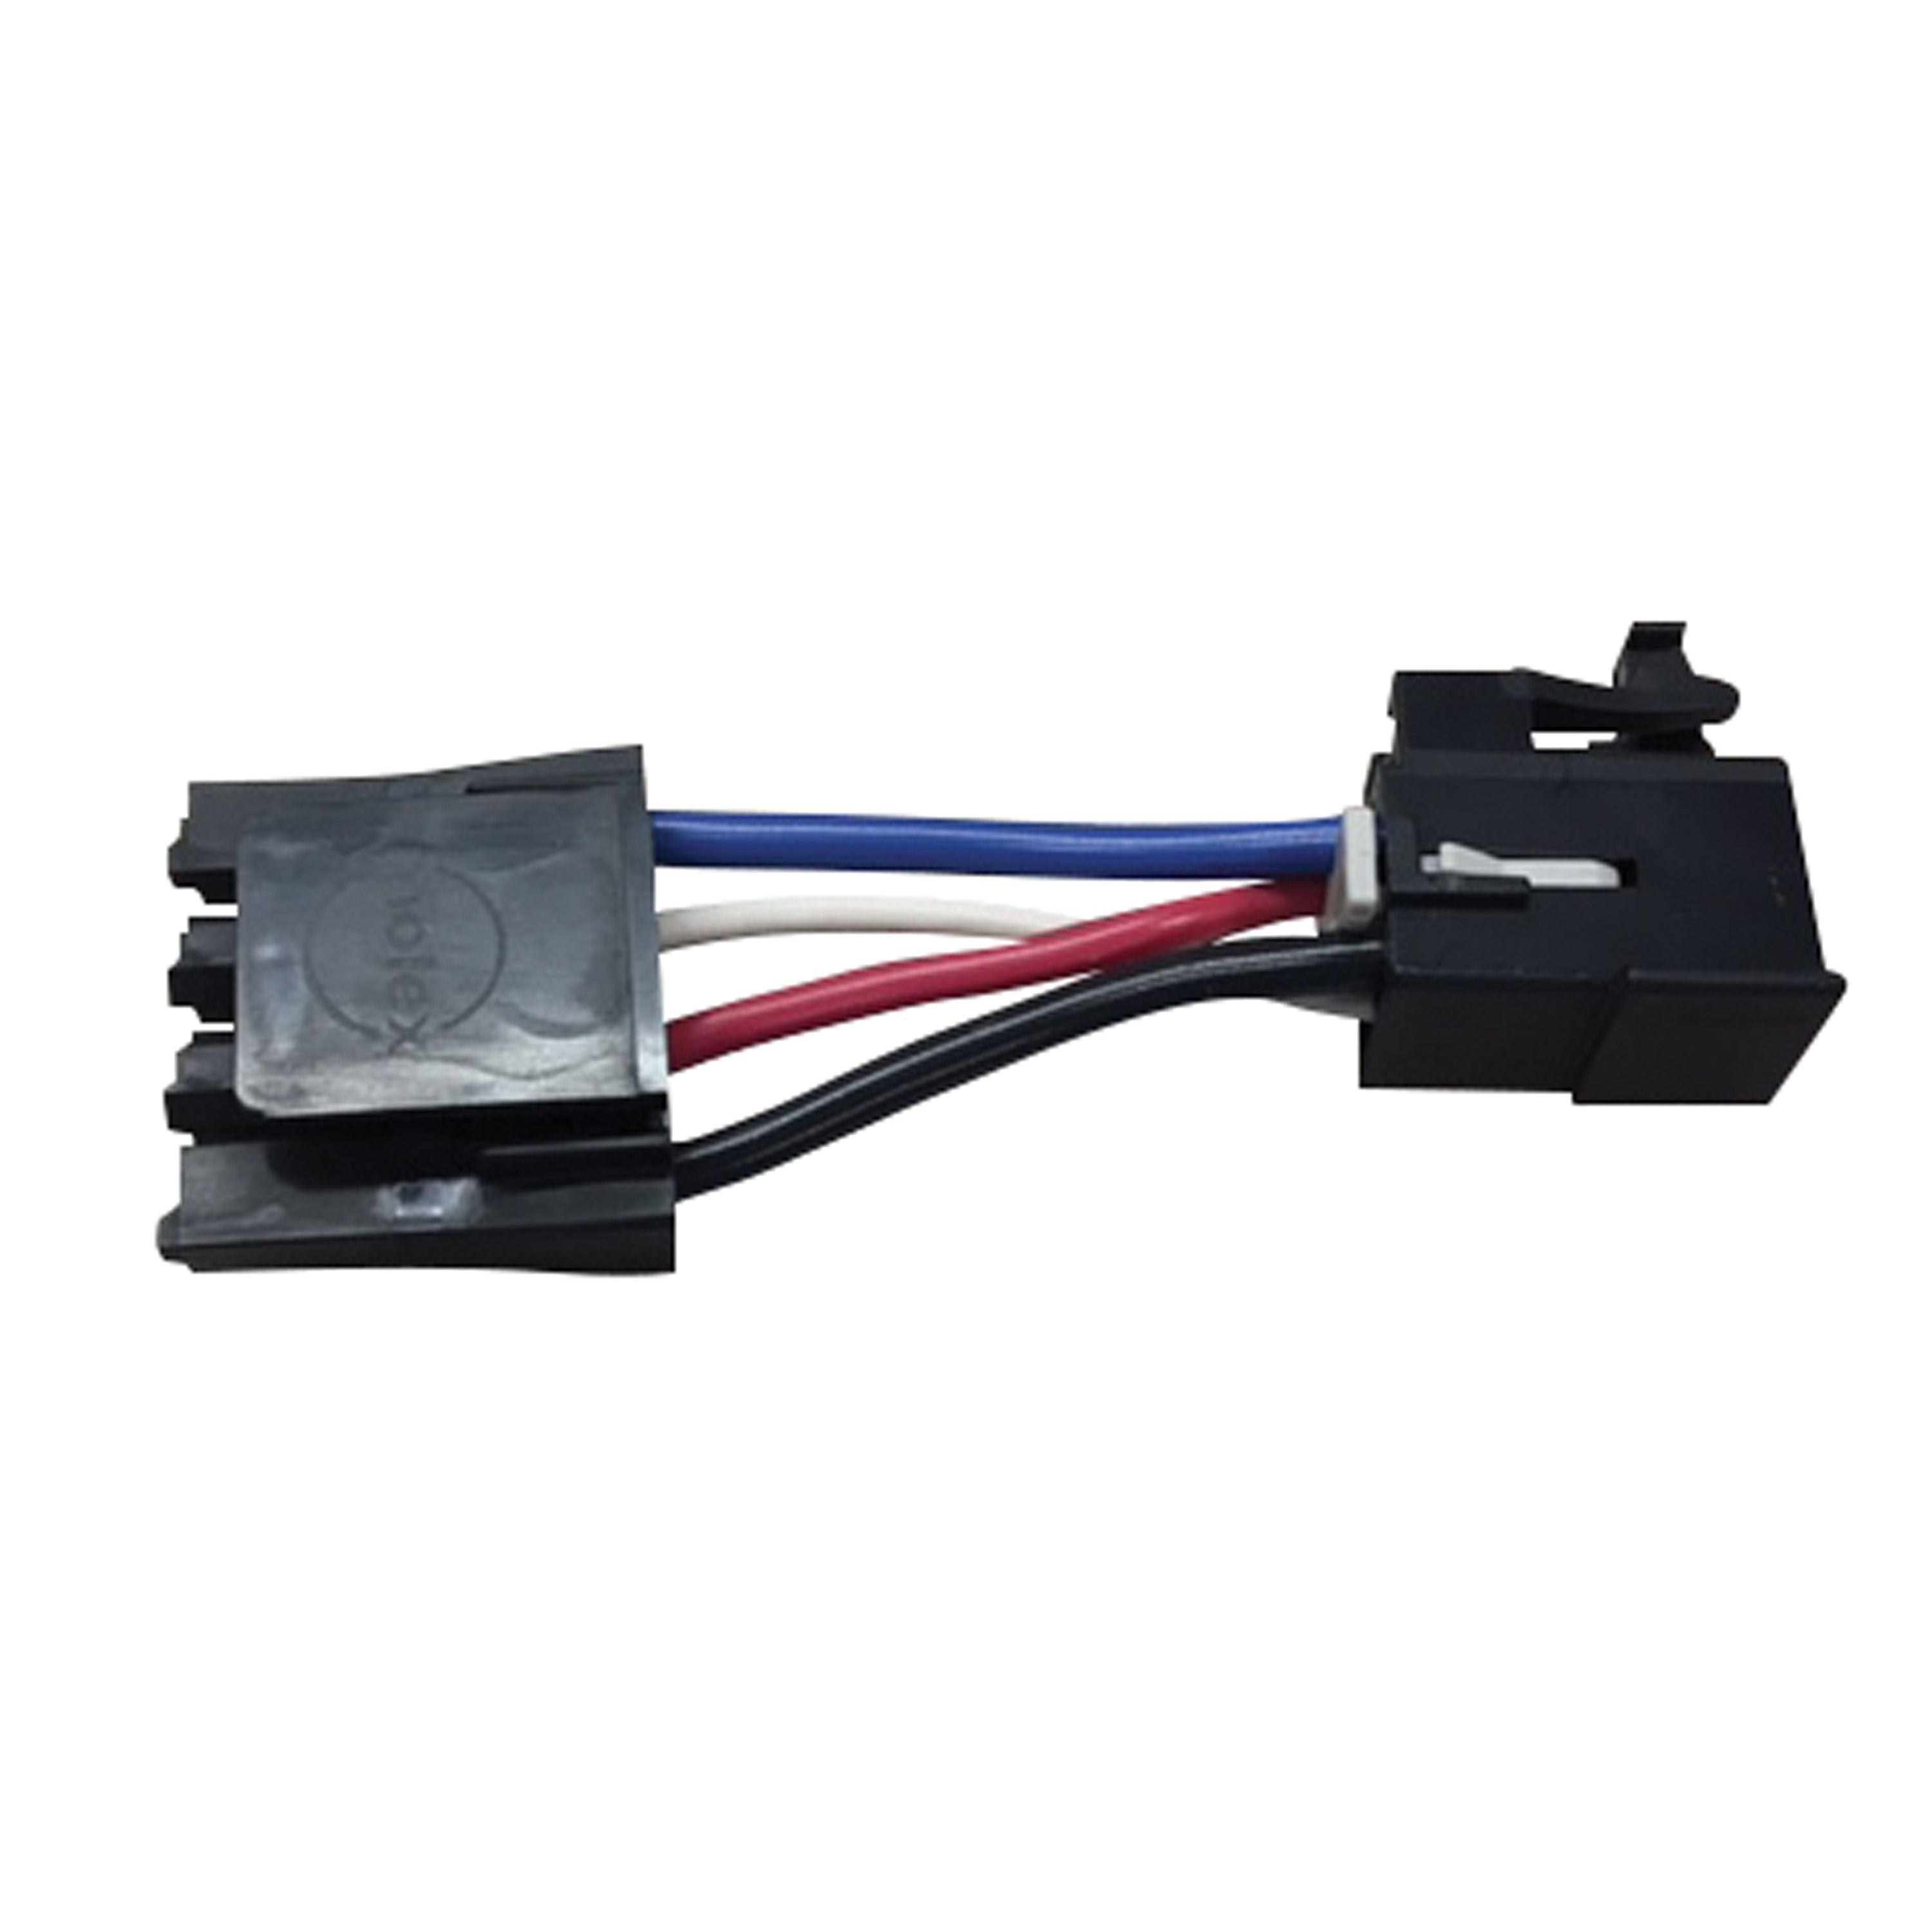 Hayes 81730 Quik-Connect OEM Adapter Harness For Hopkins